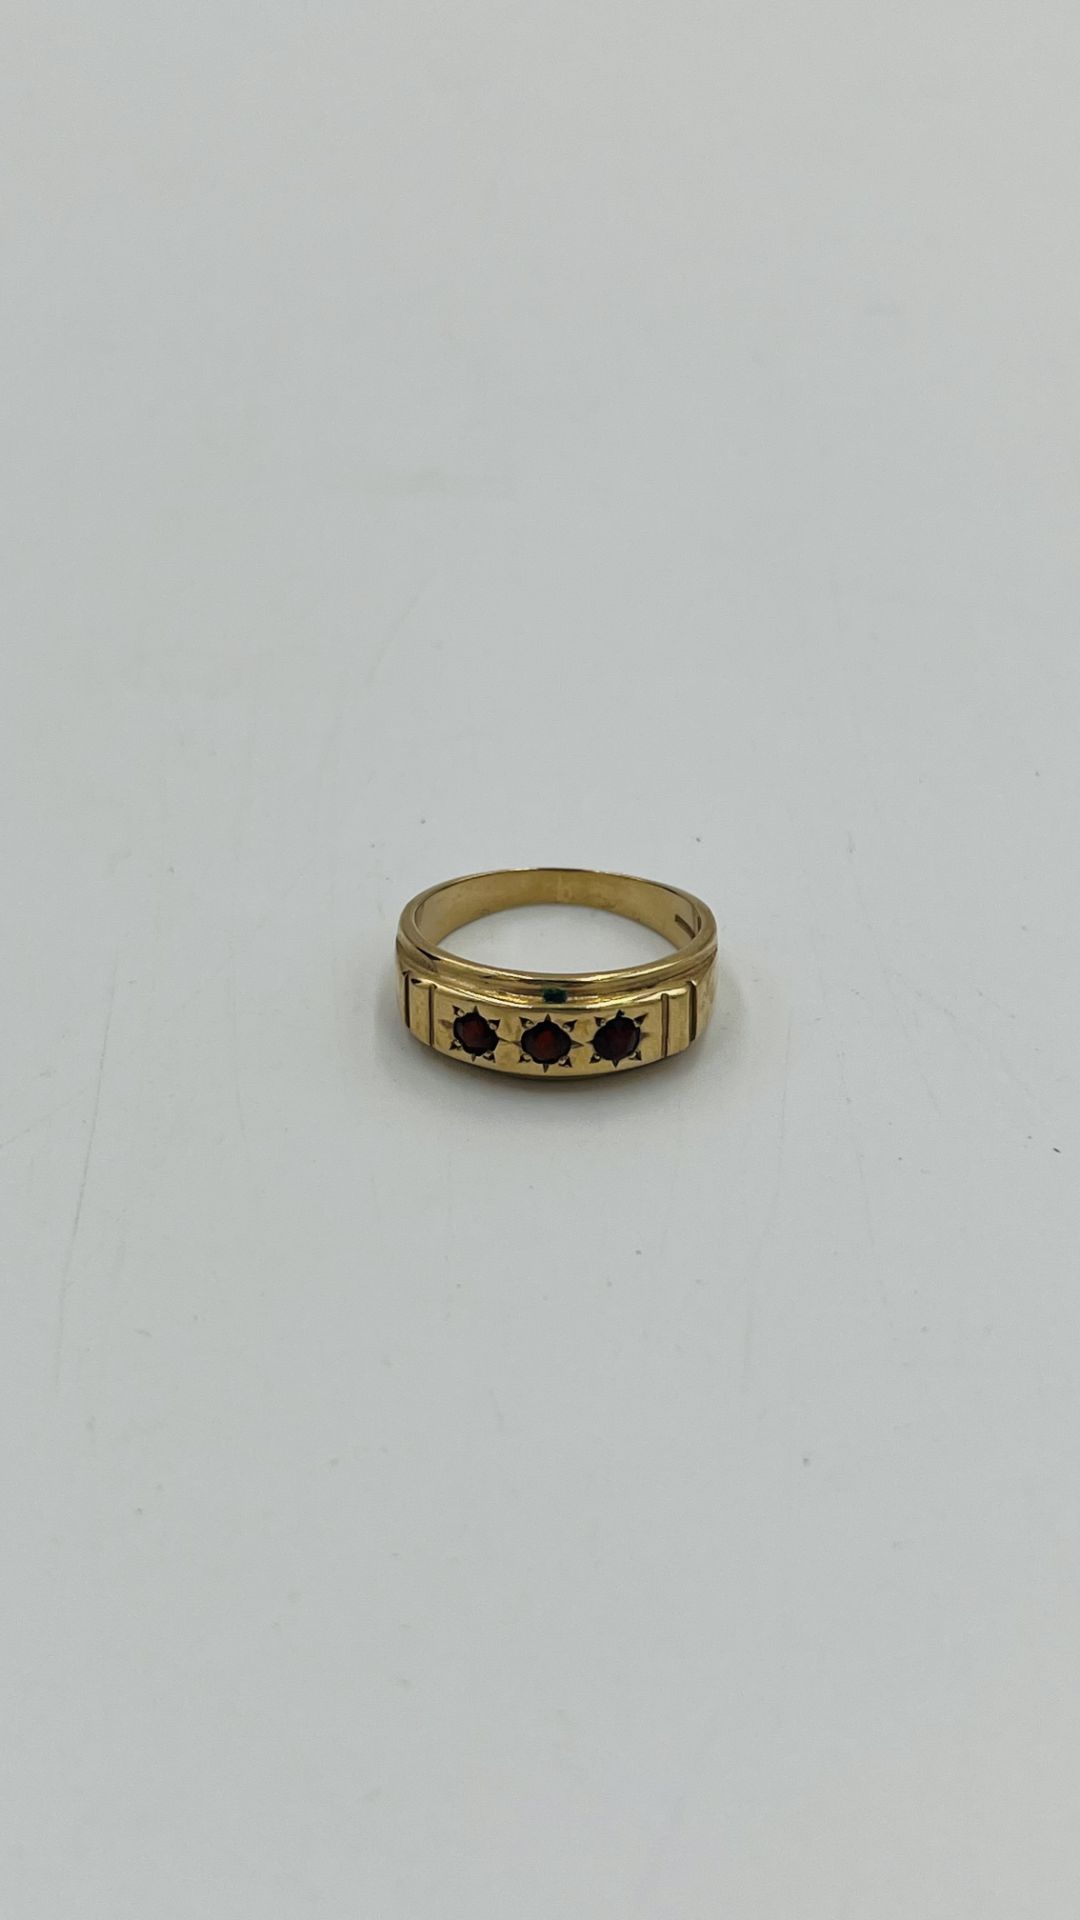 9ct gold ring set with three garnets - Image 5 of 6